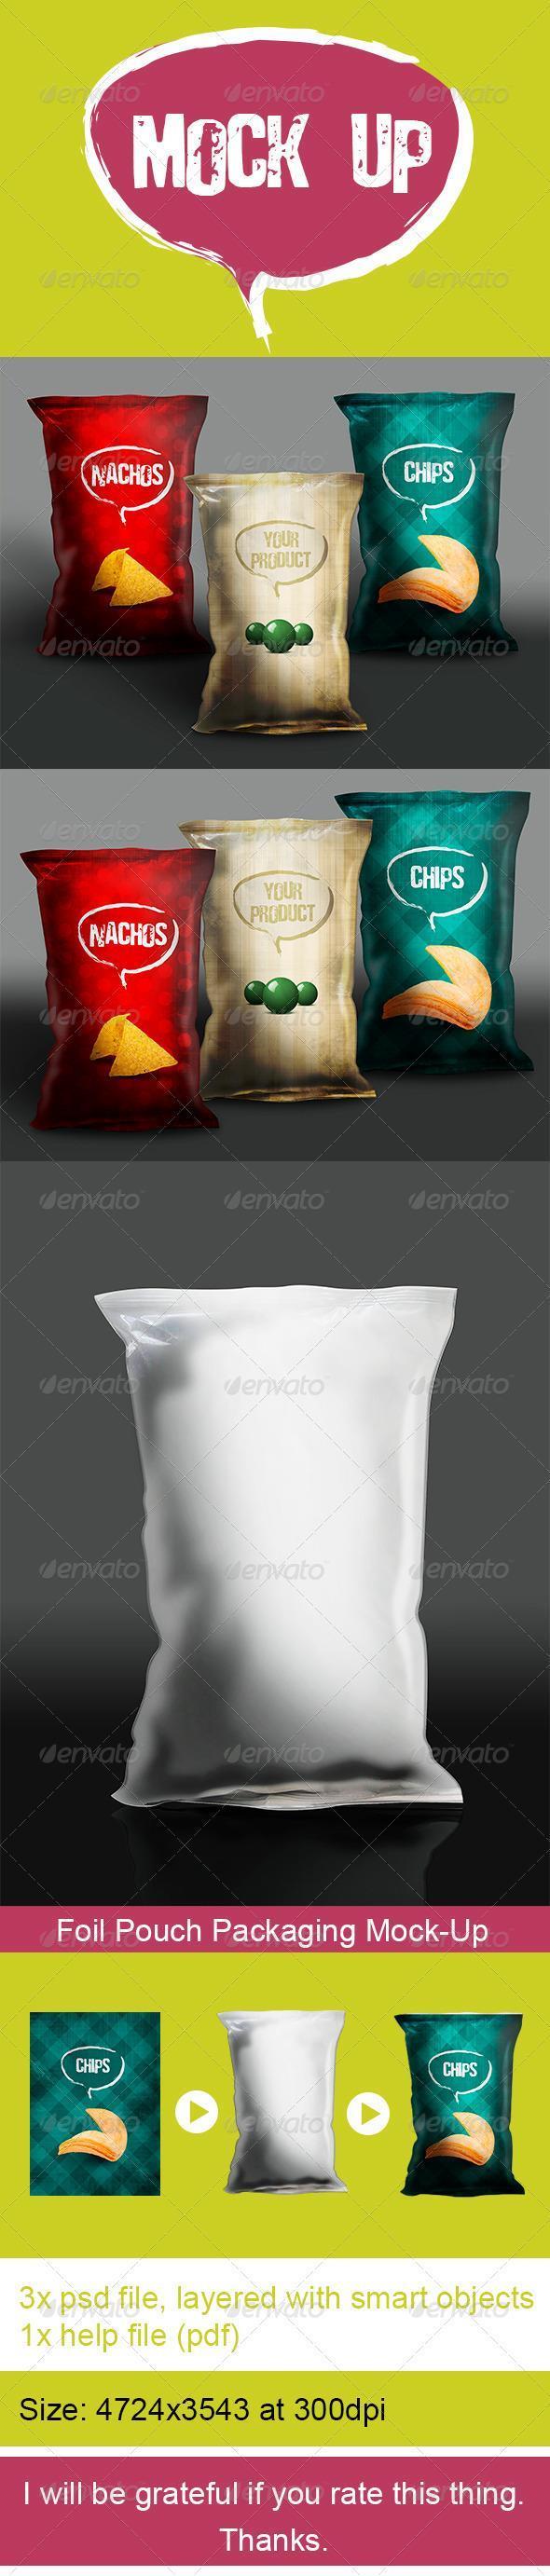 Foil Pouch Packaging Mockup